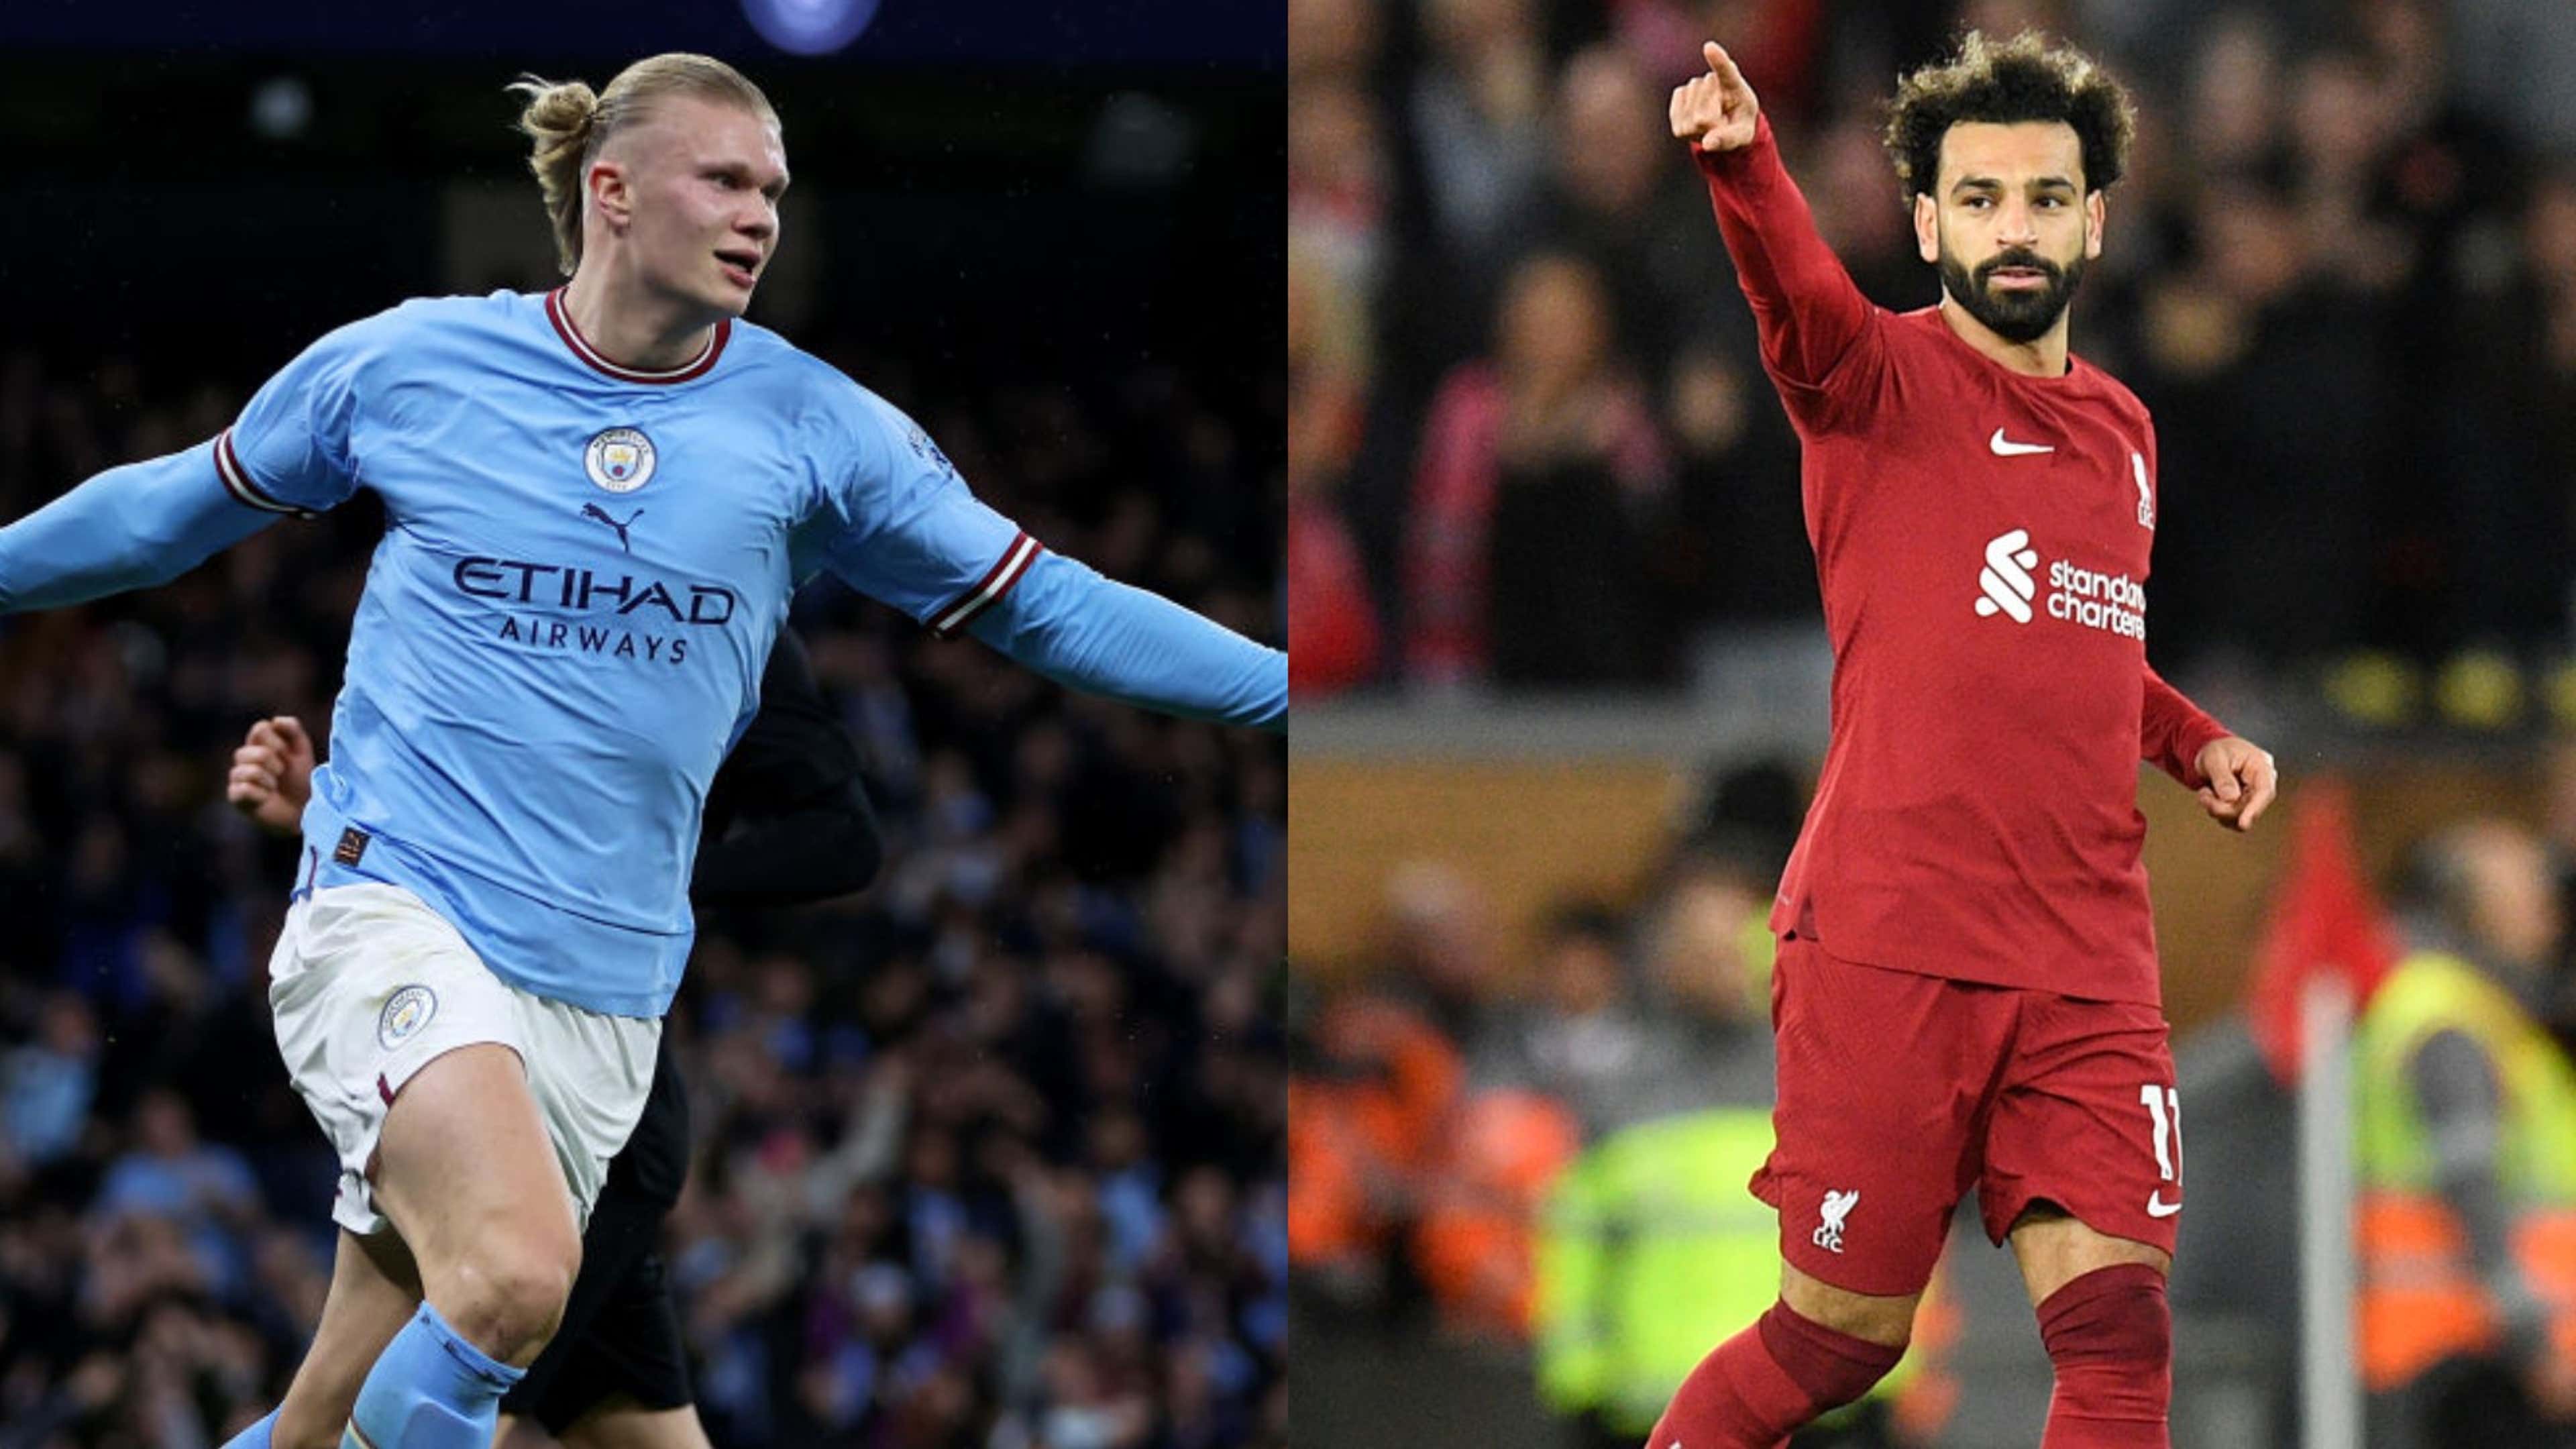 Bournemouth v Liverpool LIVE commentary: Salah starts as Reds seek cup  progress - kick-off time, team news and how to follow